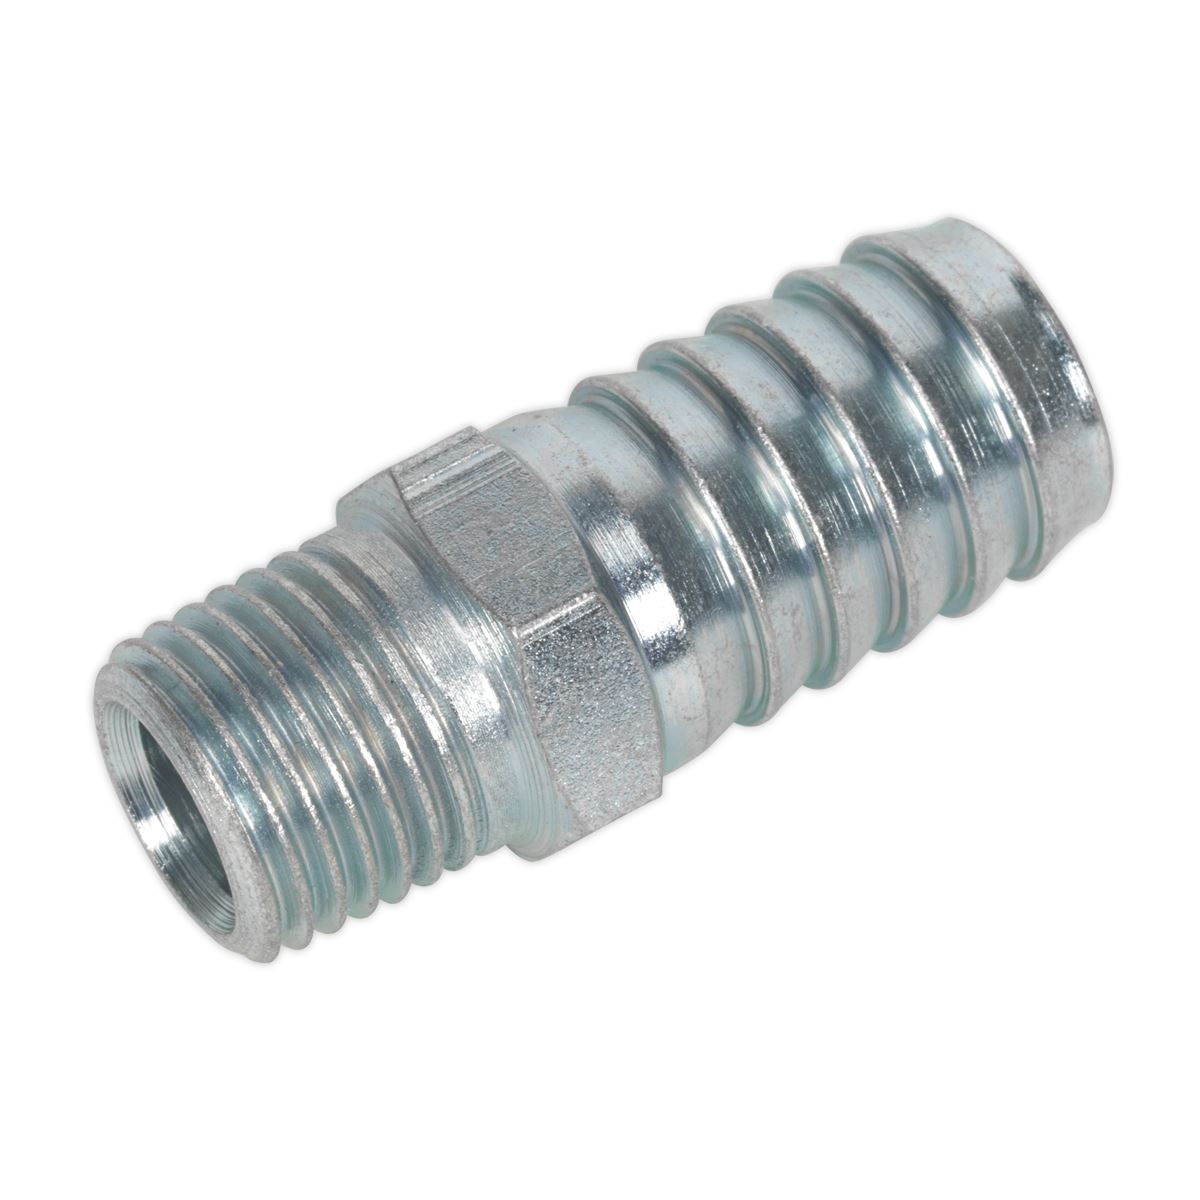 PCL Screwed Tailpiece Male 1/4"BSPT - 1/2" Hose Pack of 5